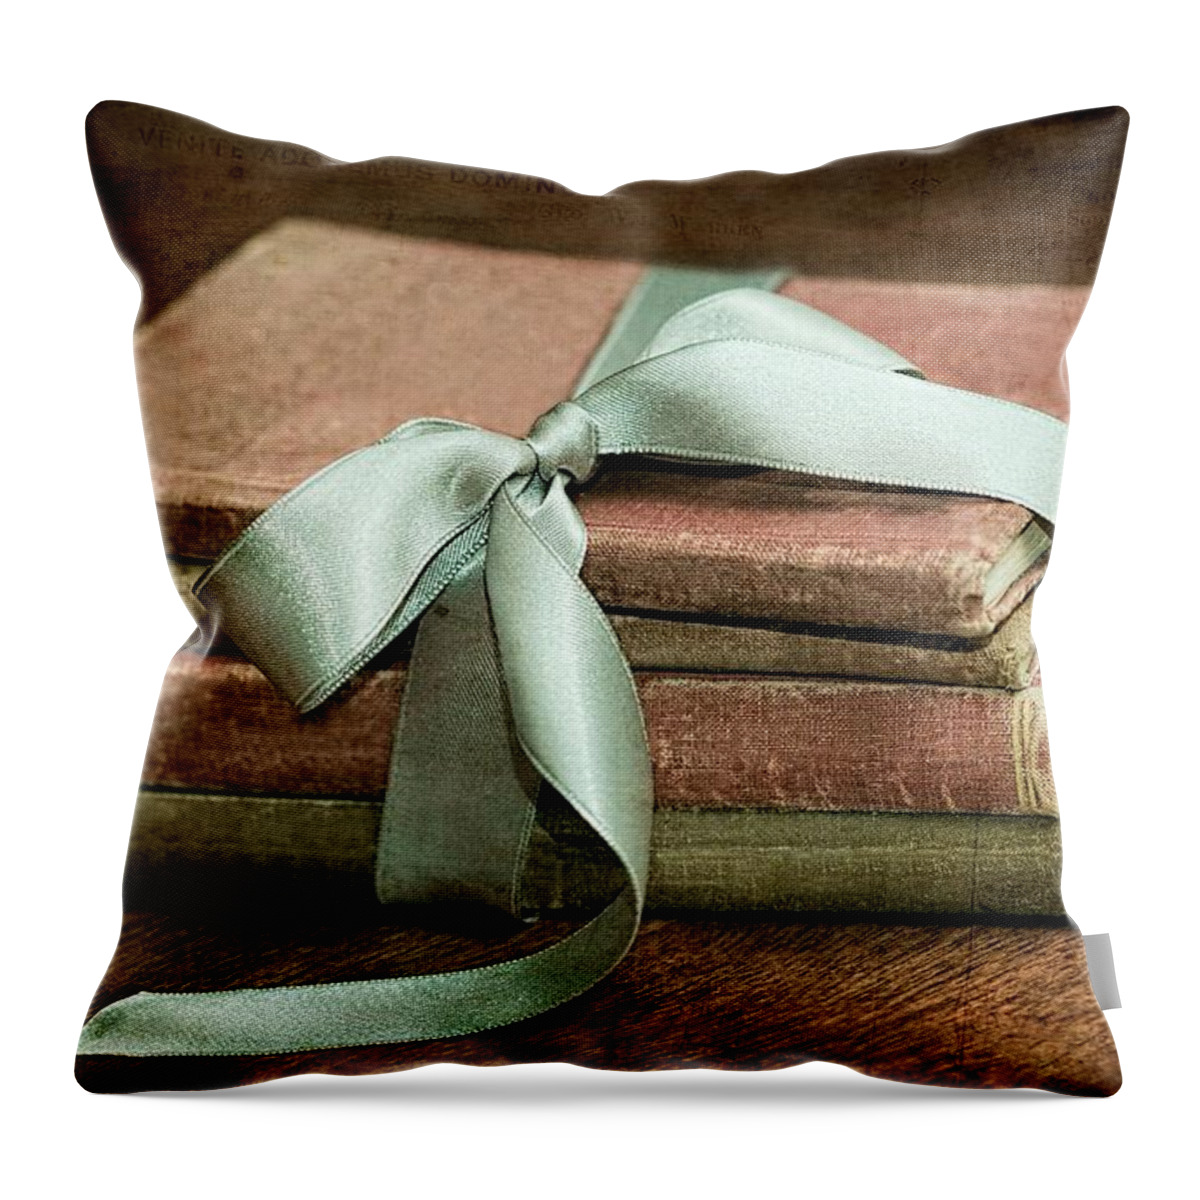 Vintage Books Throw Pillow featuring the photograph Vintage Books Tied With Mint Ribbon by Tracie Schiebel